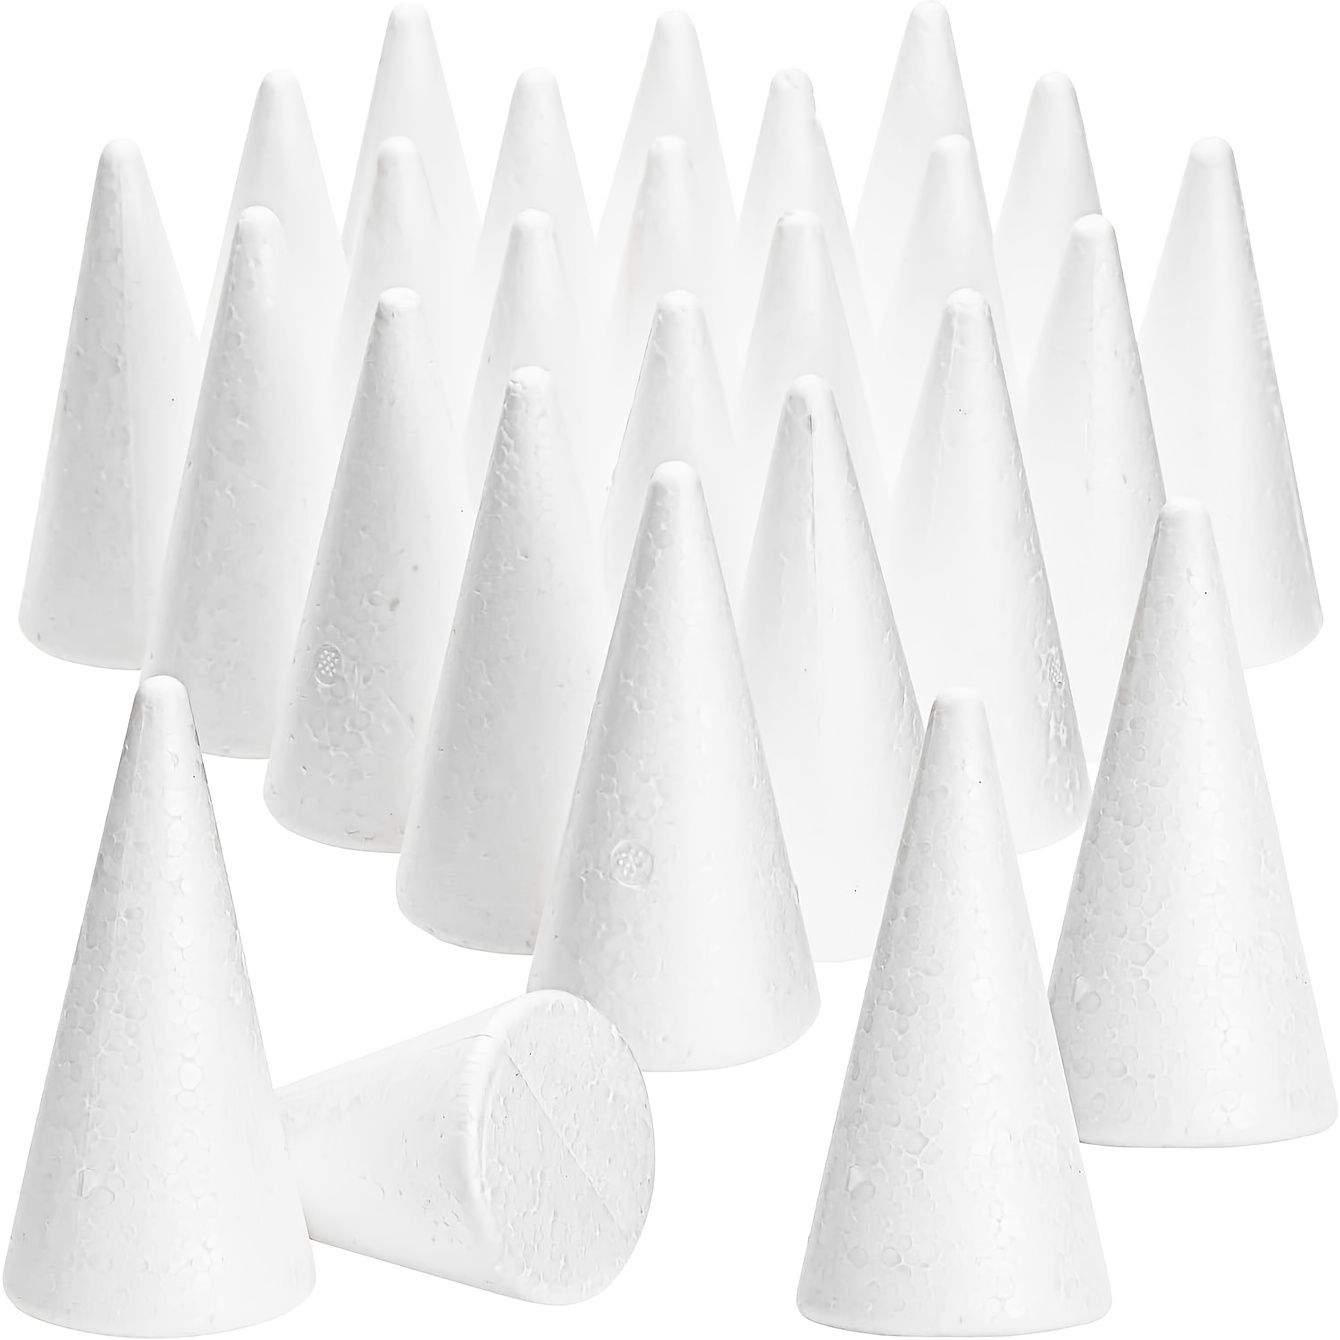 1pc White Solid Foam Cone, 25cm/9.84in, Suitable For Diy Craft Projects,  Painting, Christmas, Halloween, New Year, Birthday Home Decoration Party  Decorations,, Shop The Latest Trends